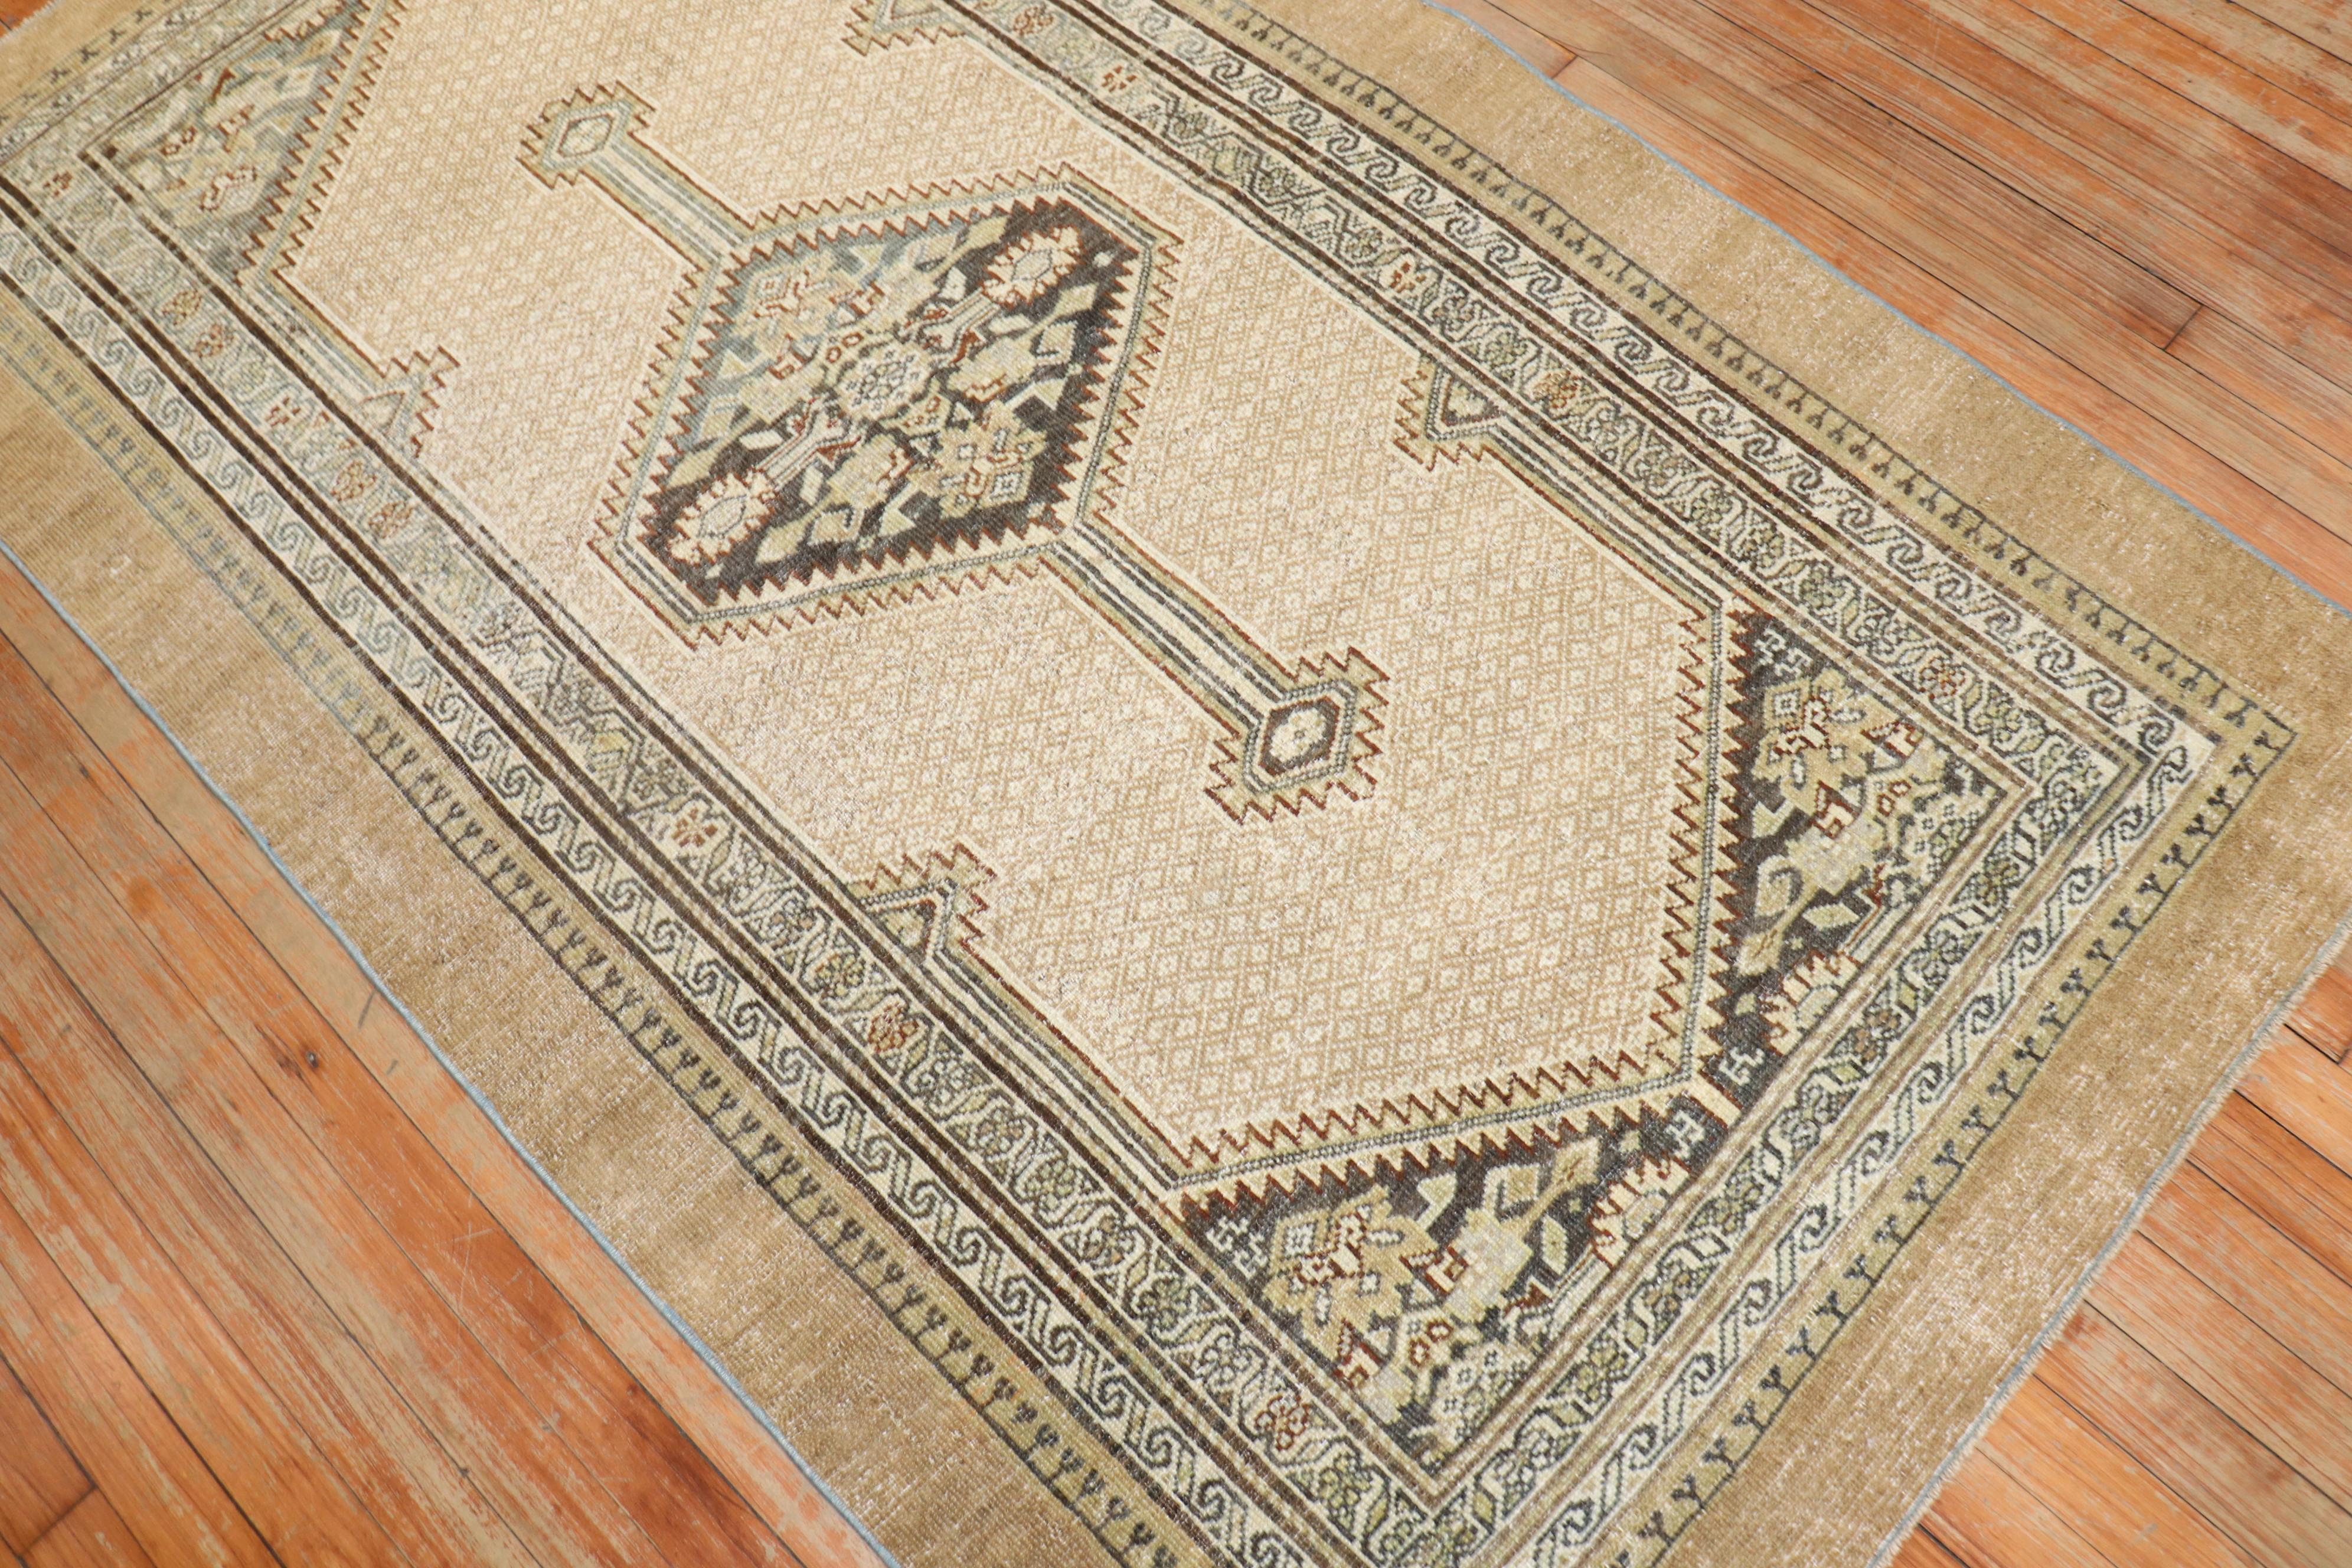 An early 20th-century Persian Serab accent tribal rug.

Measures: 3'9